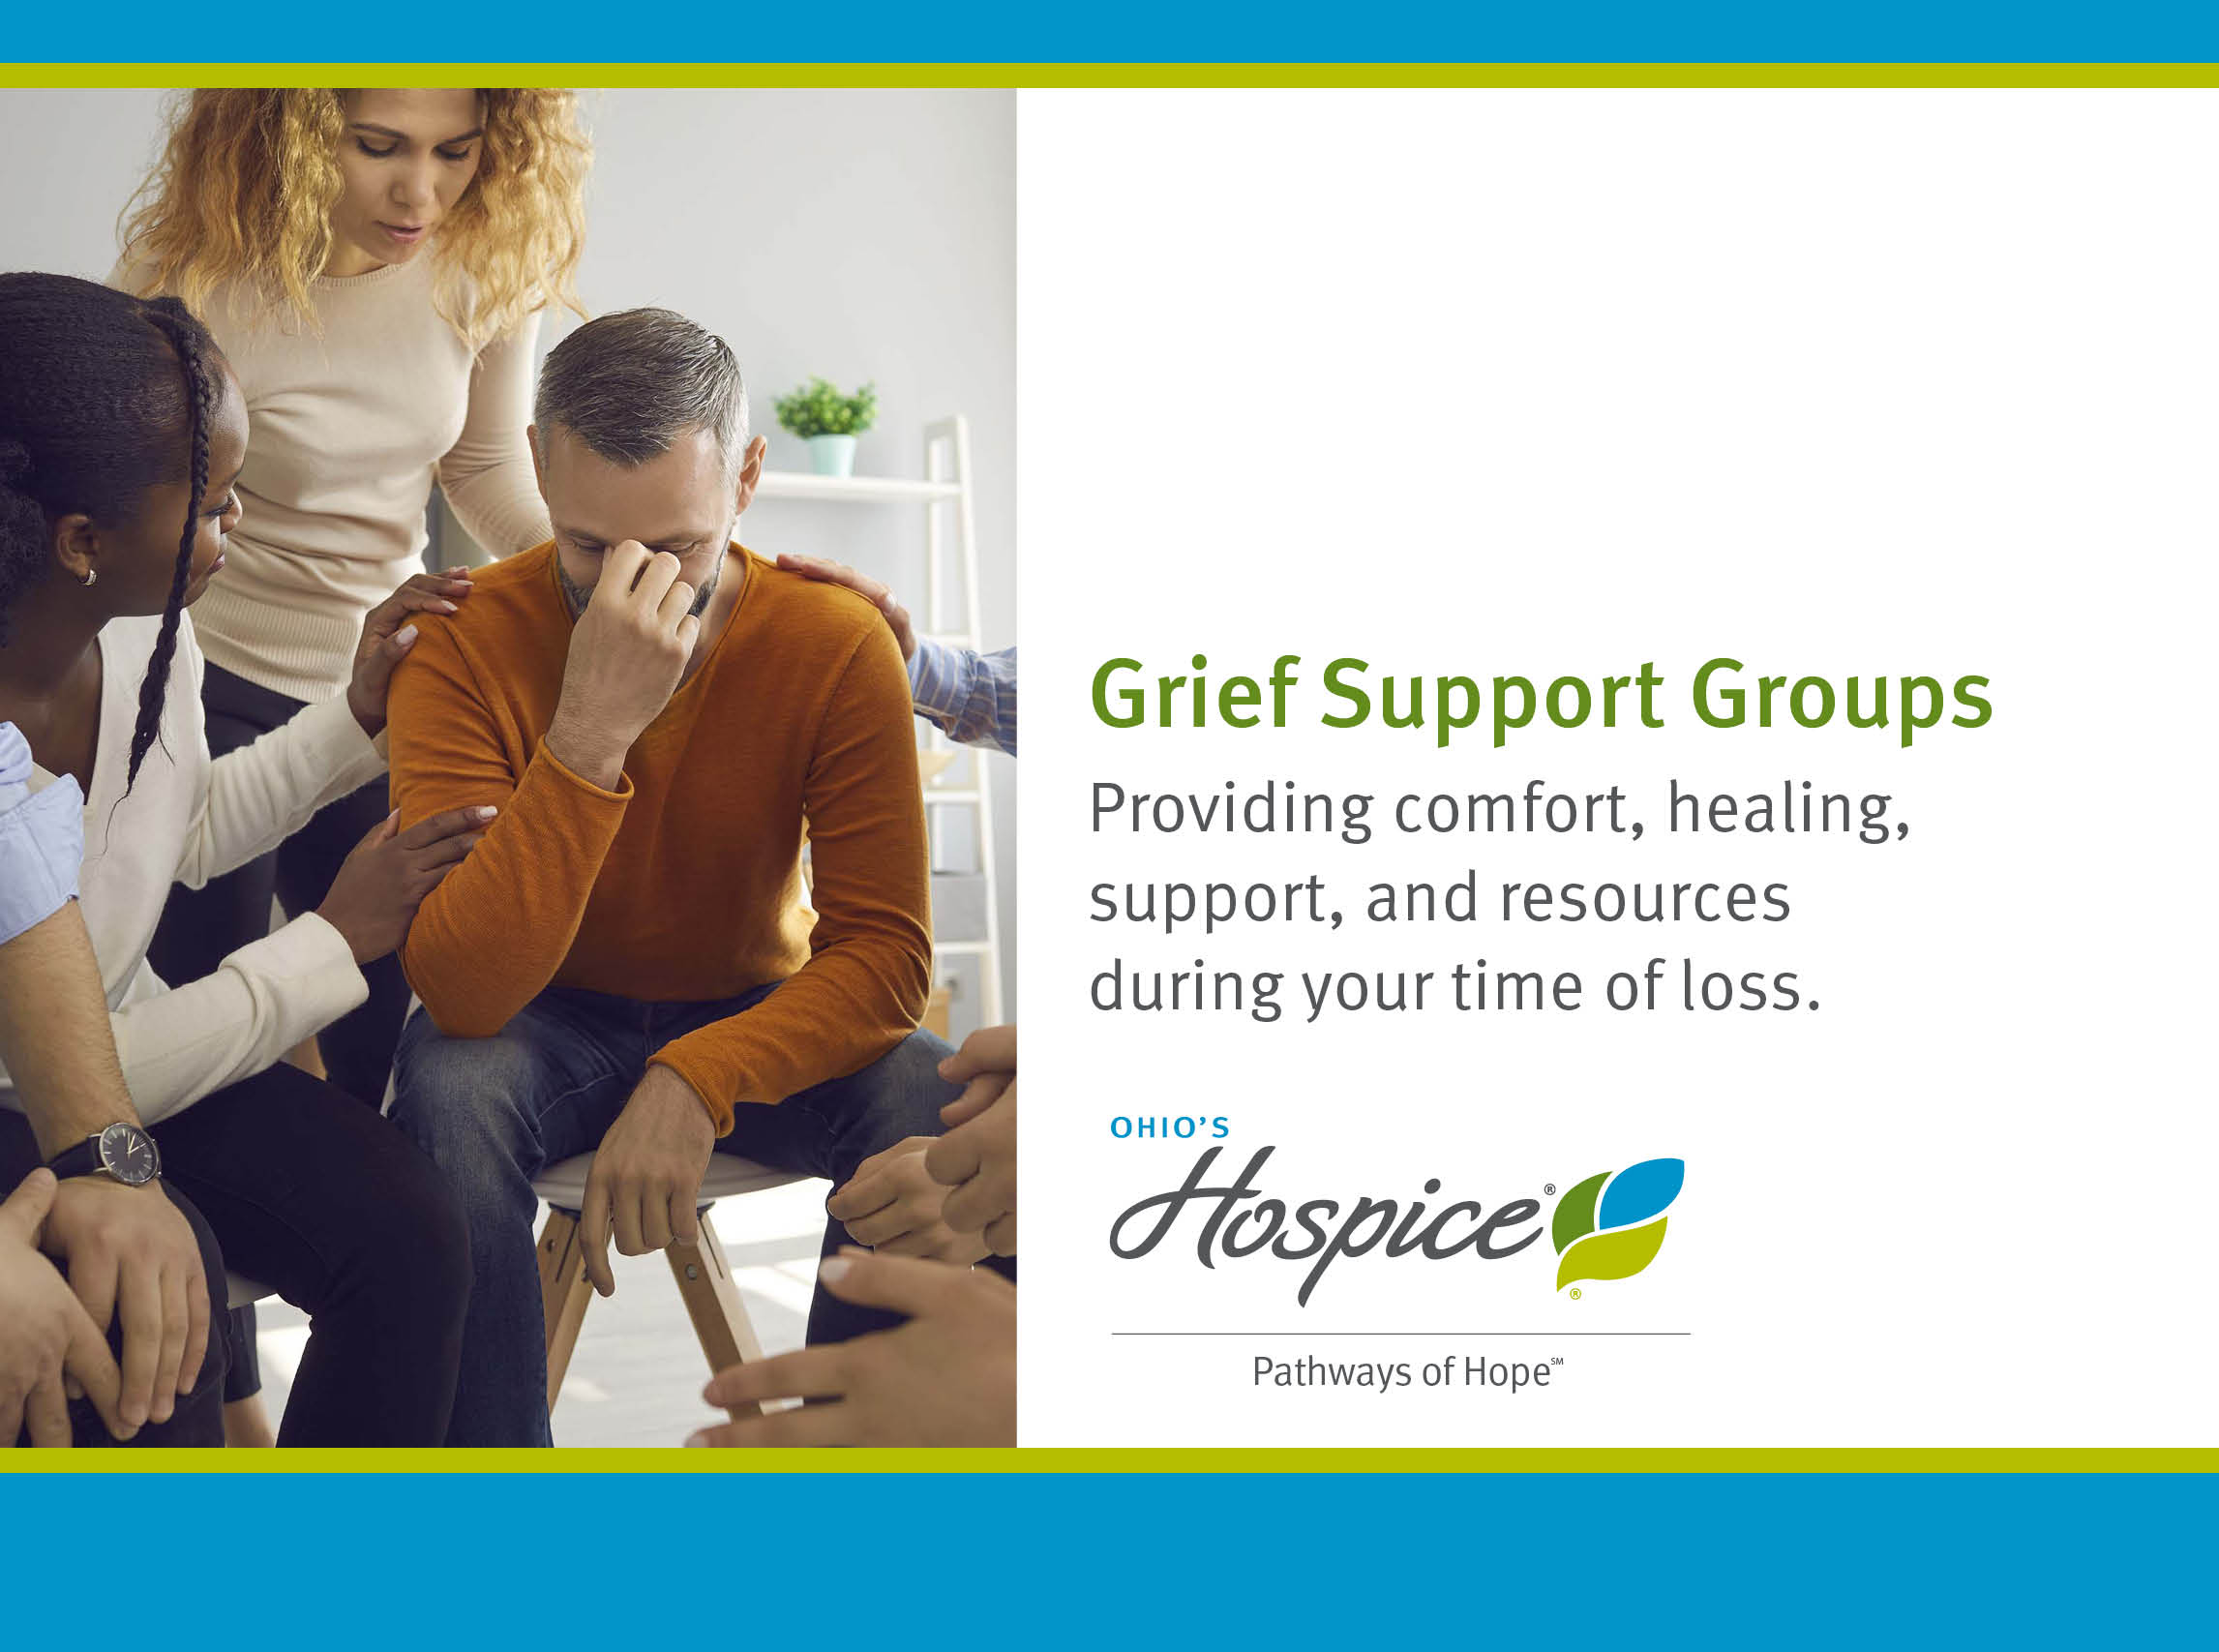 Grief Support Groups. Providing comfort, healing, support, and resources during your time of loss. Ohio's Hospice Pathways of Hope